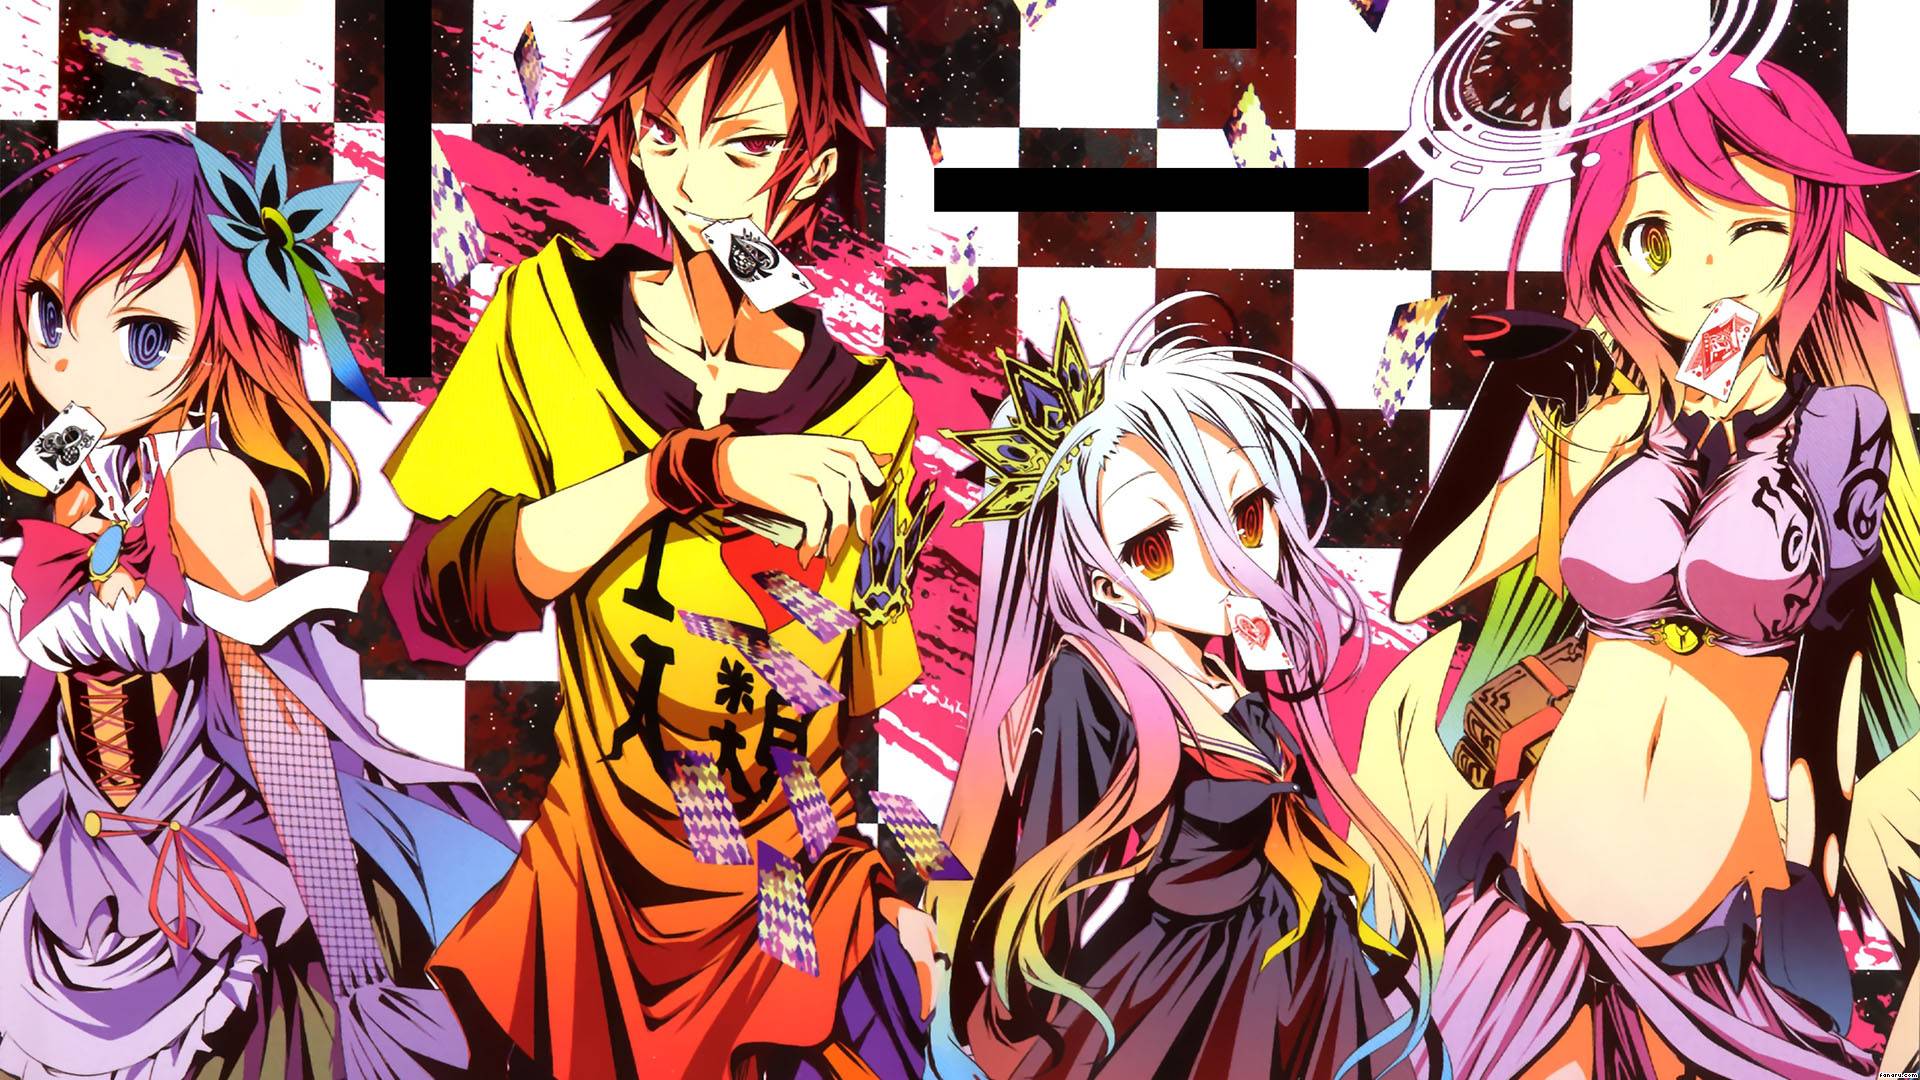  No Game No Life love in the form of some images I’ve come across